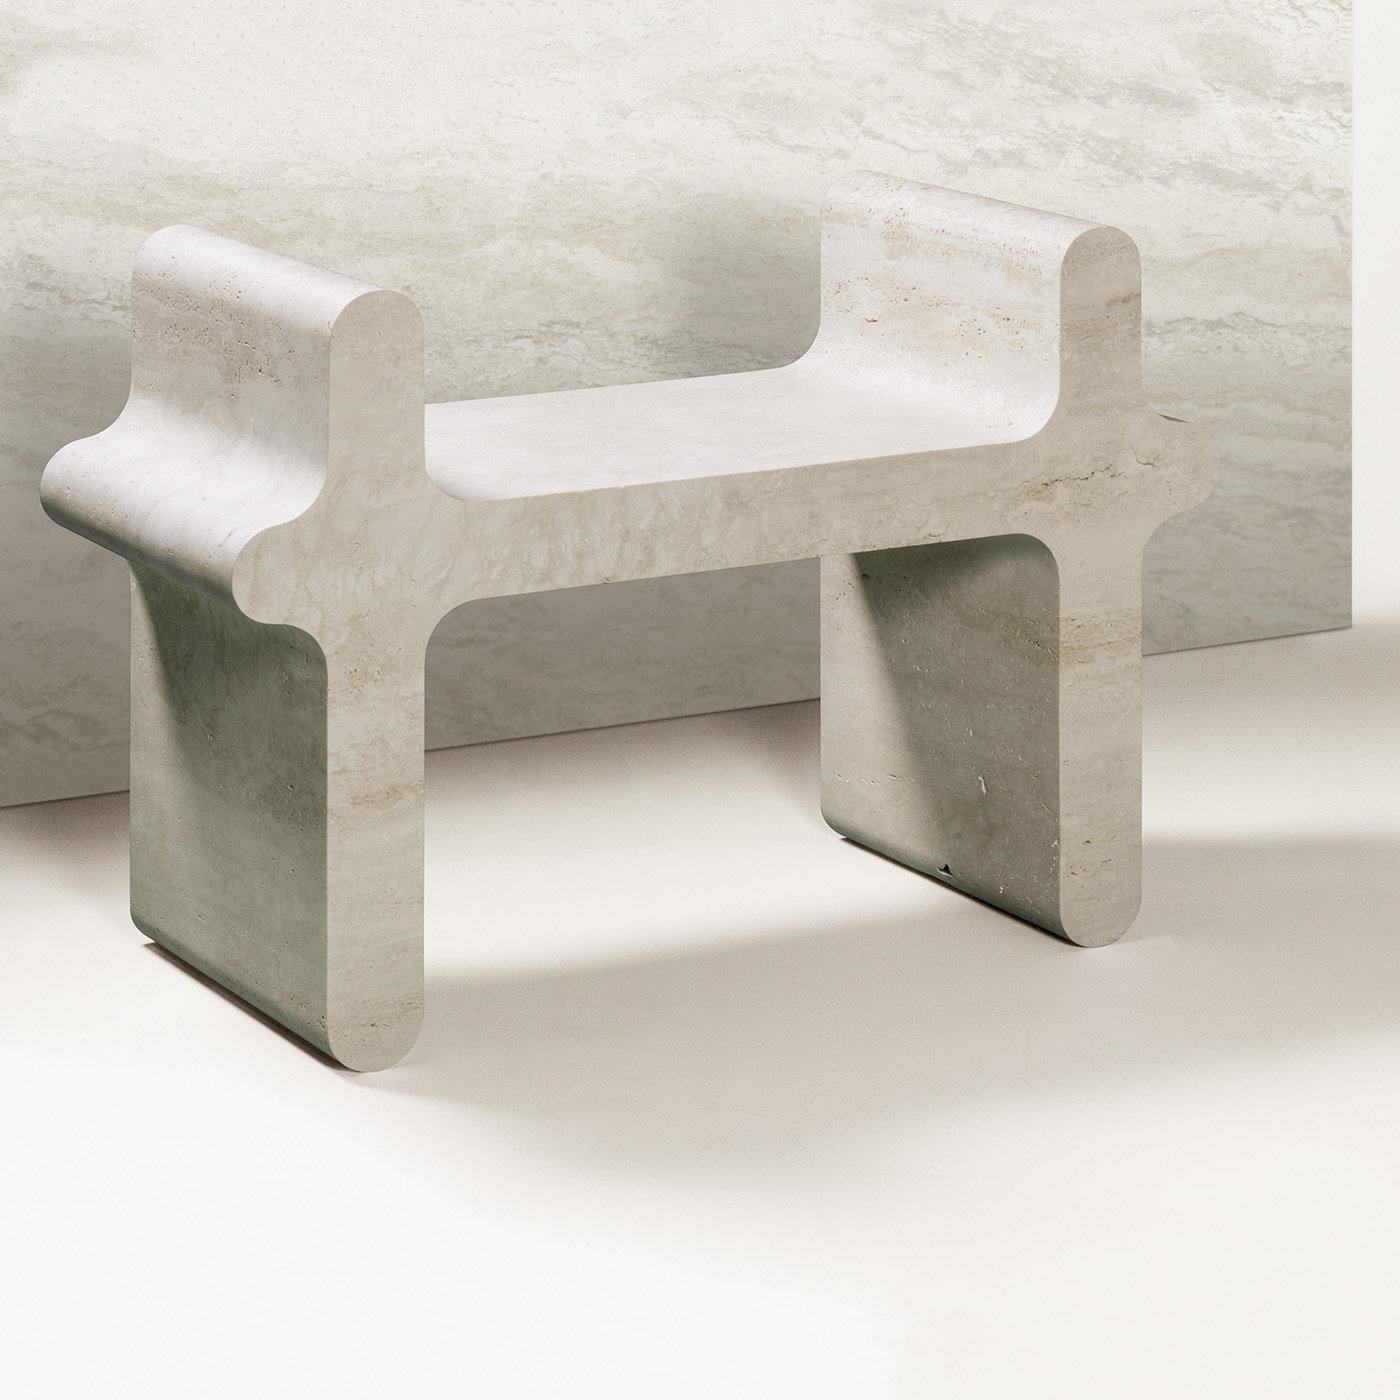 Contemporary travertine stool - Ossicle N.1 by Francesco Balzano for Giobagnara.

Part of a superb series of benches, tables, and seats inspired by the soft yet monumental lines that make up the pieces of Ancient Greek and Roman game 